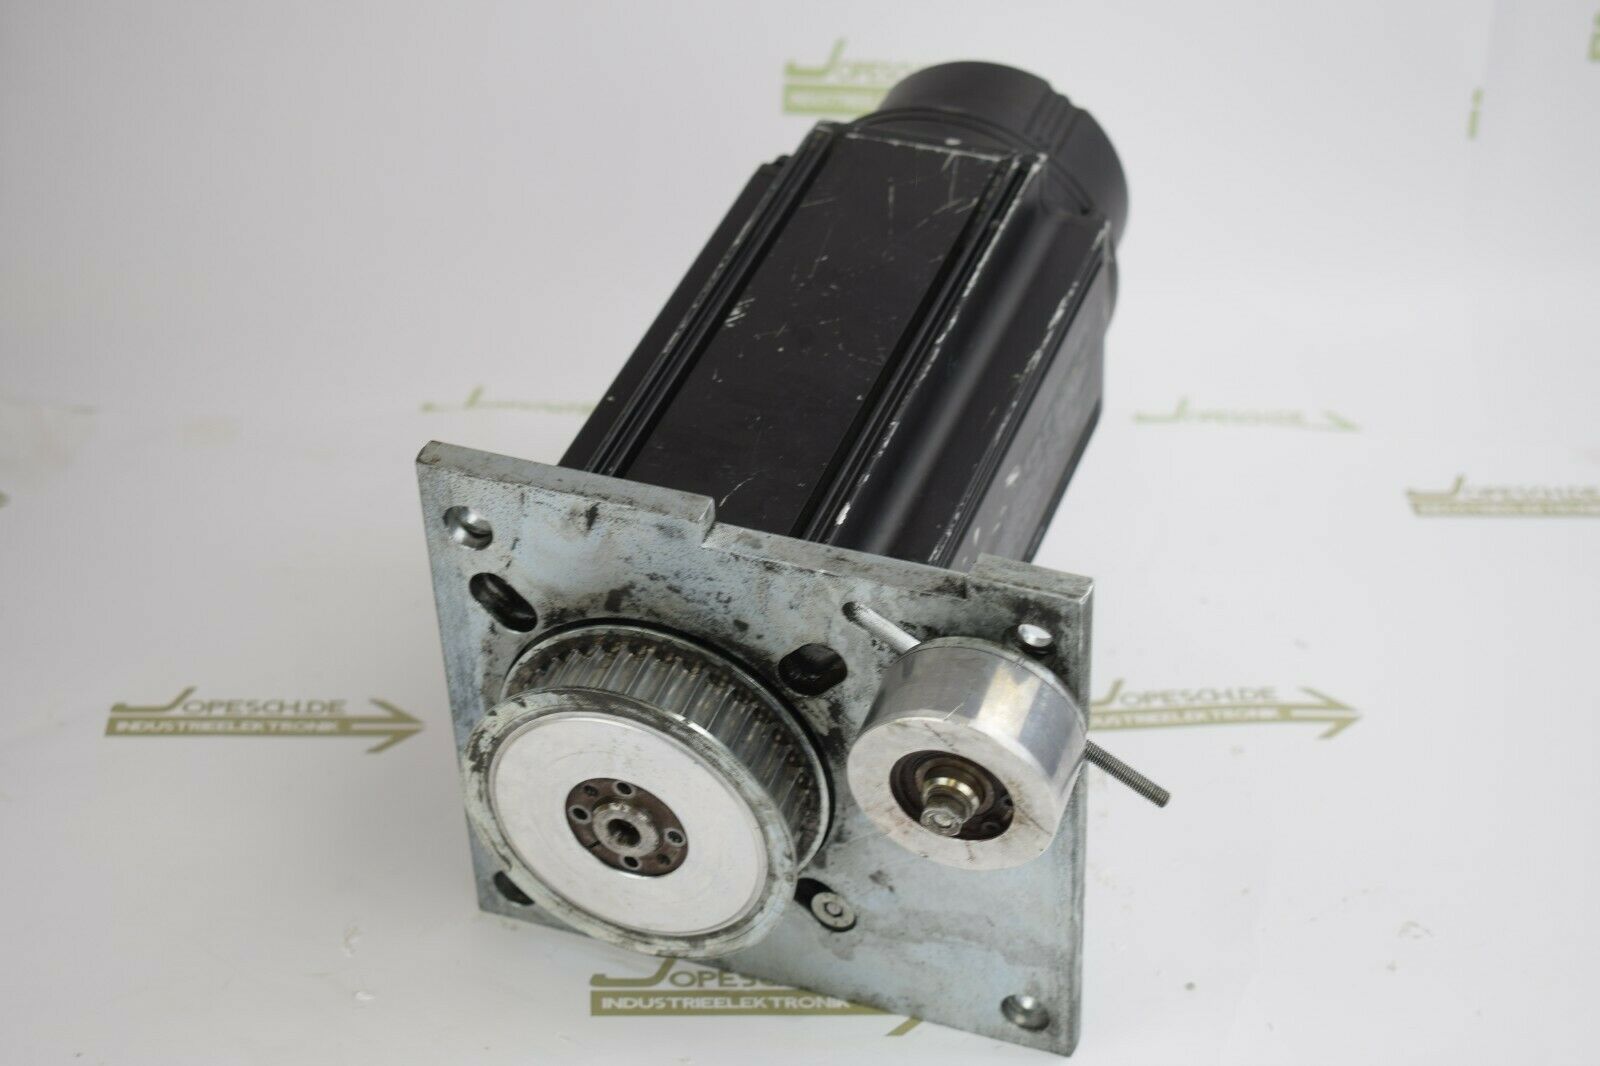 Rexroth Indramat Permanent Magnet Motor MDD071C-N-030-N2T-095PA1